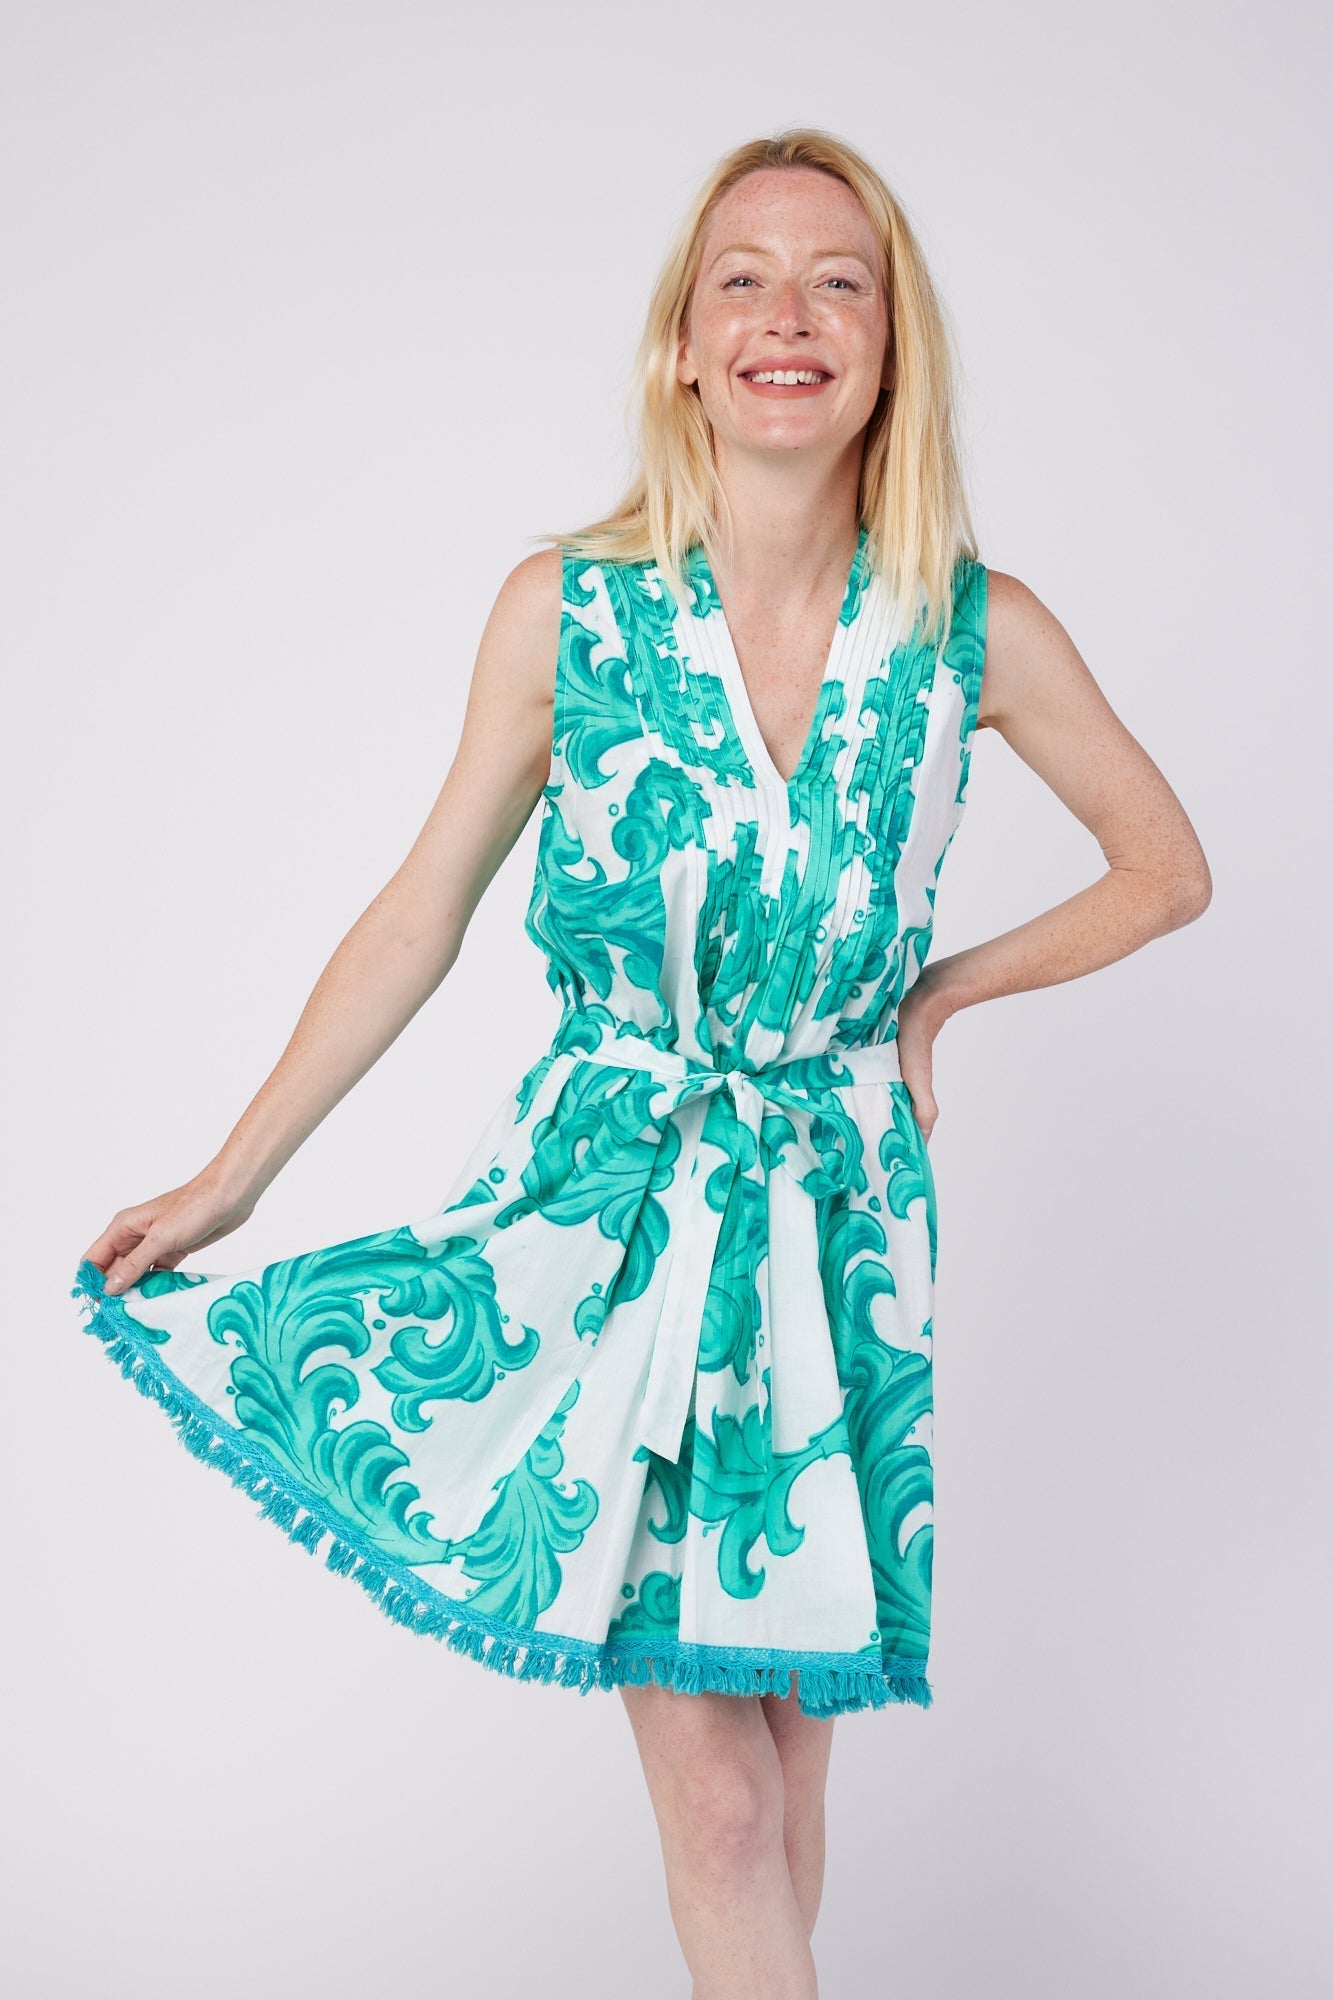 ModaPosa Felice Sleeveless V-Neck Puntuck Knee Length Dress with Detachable Belt in White Aqua Baroque . Discover women's resort dresses and lifestyle clothing inspired by the Mediterranean. Free worldwide shipping available!